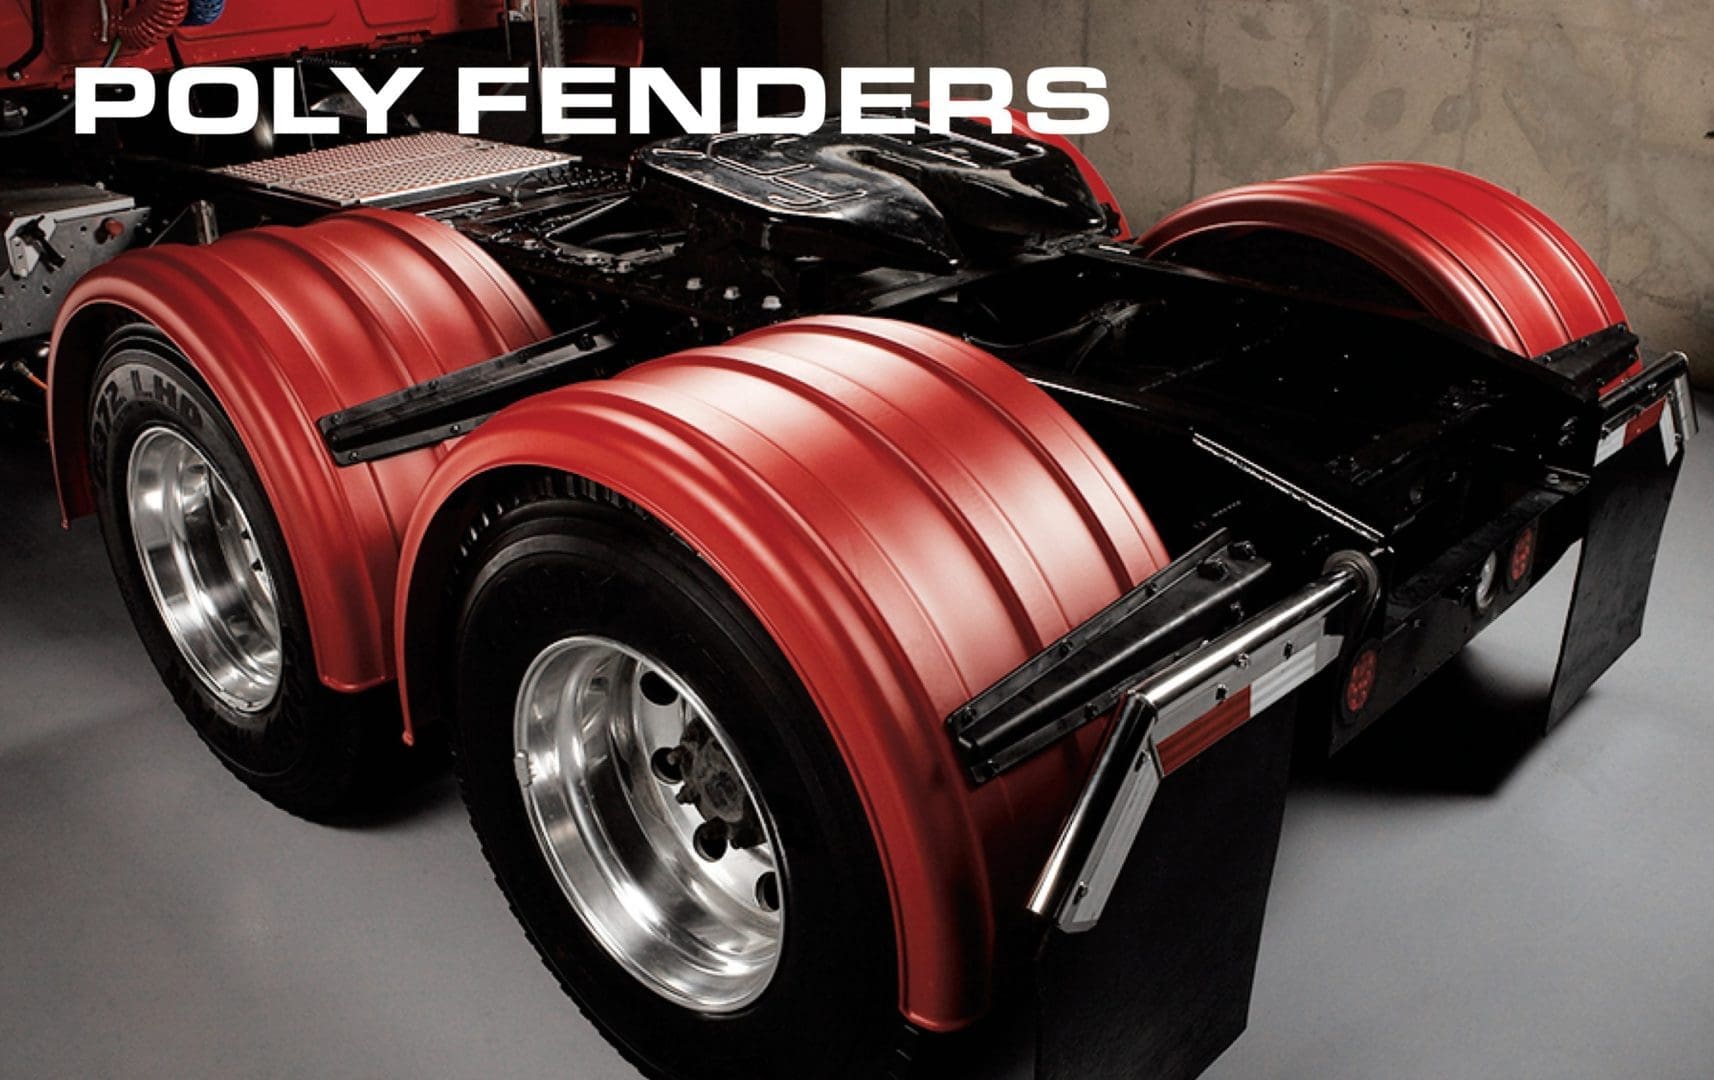 Minimizer's mirror-finished fenders